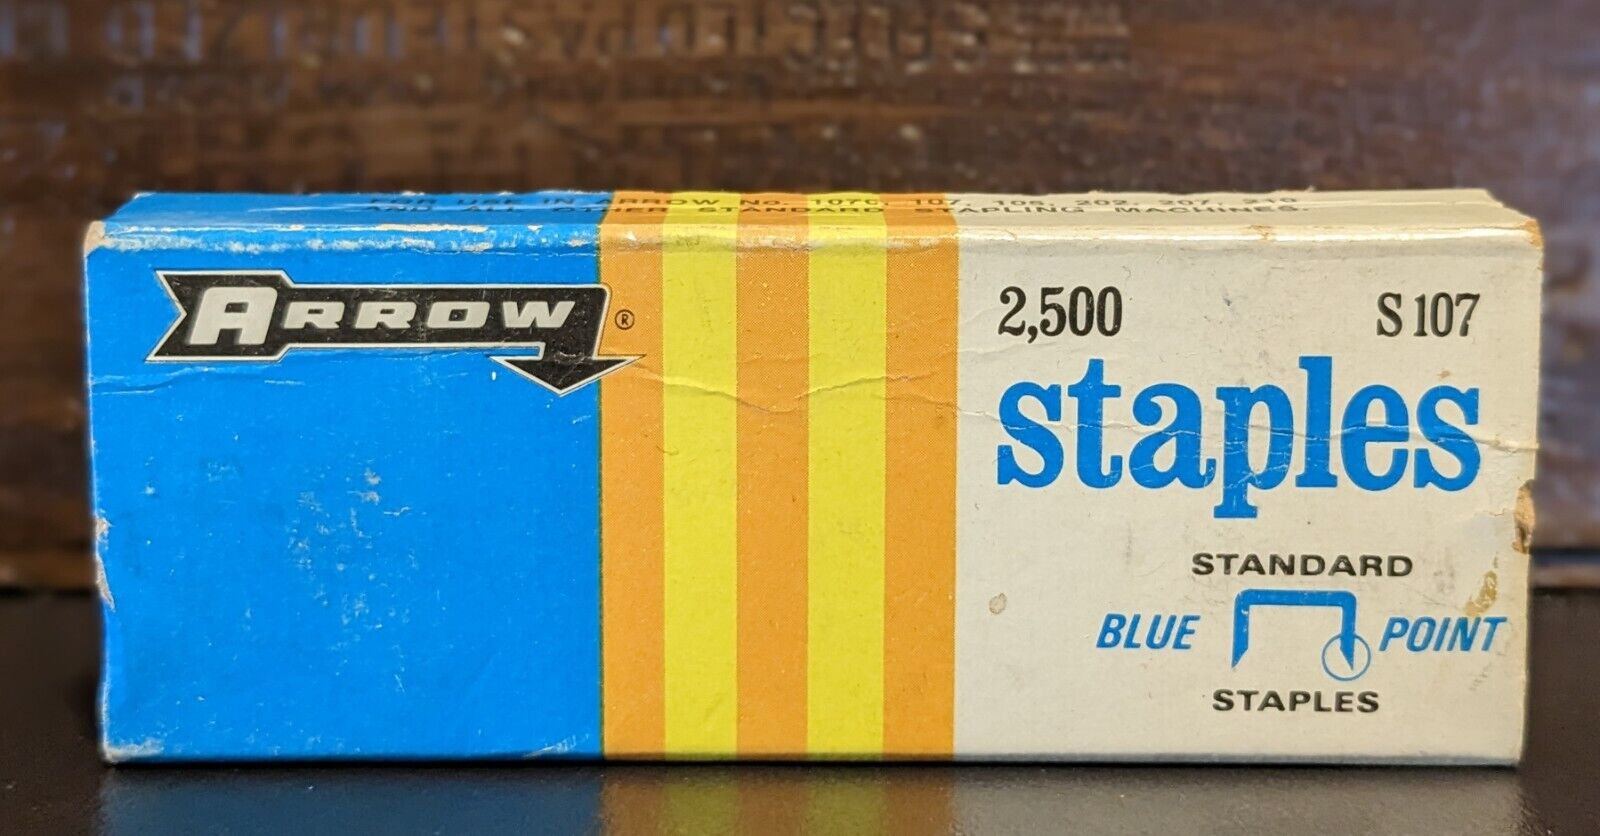 VINTAGE ARROW 2,500 STANDARD BLUE POINT S 107  STAPLES PARTIAL BOX OVER 3/4 FULL